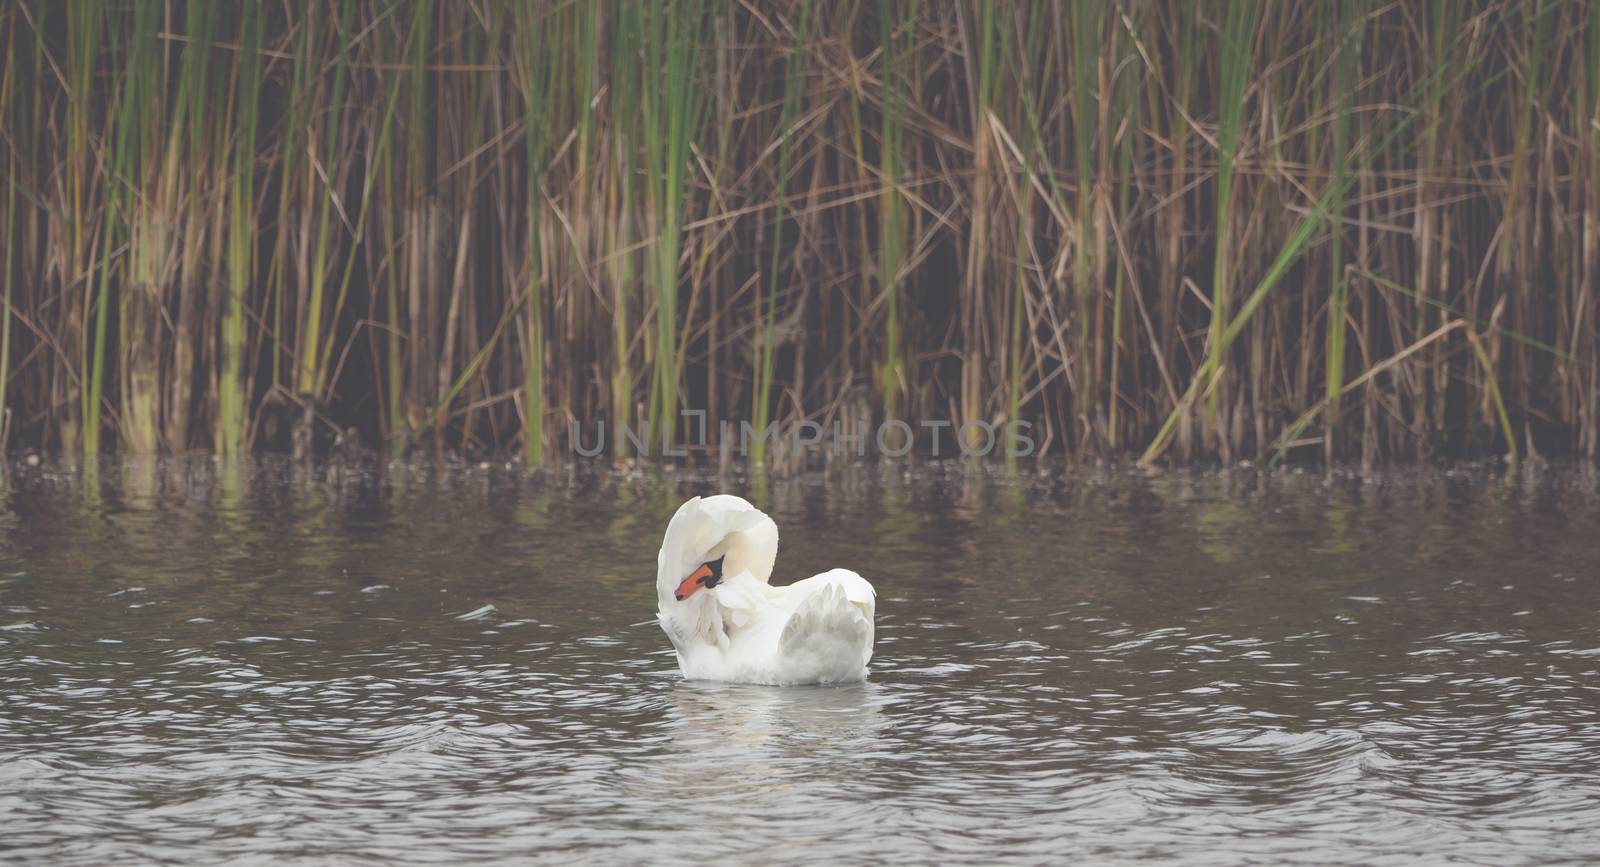 A white swan is swimming on the lake by sandra_fotodesign